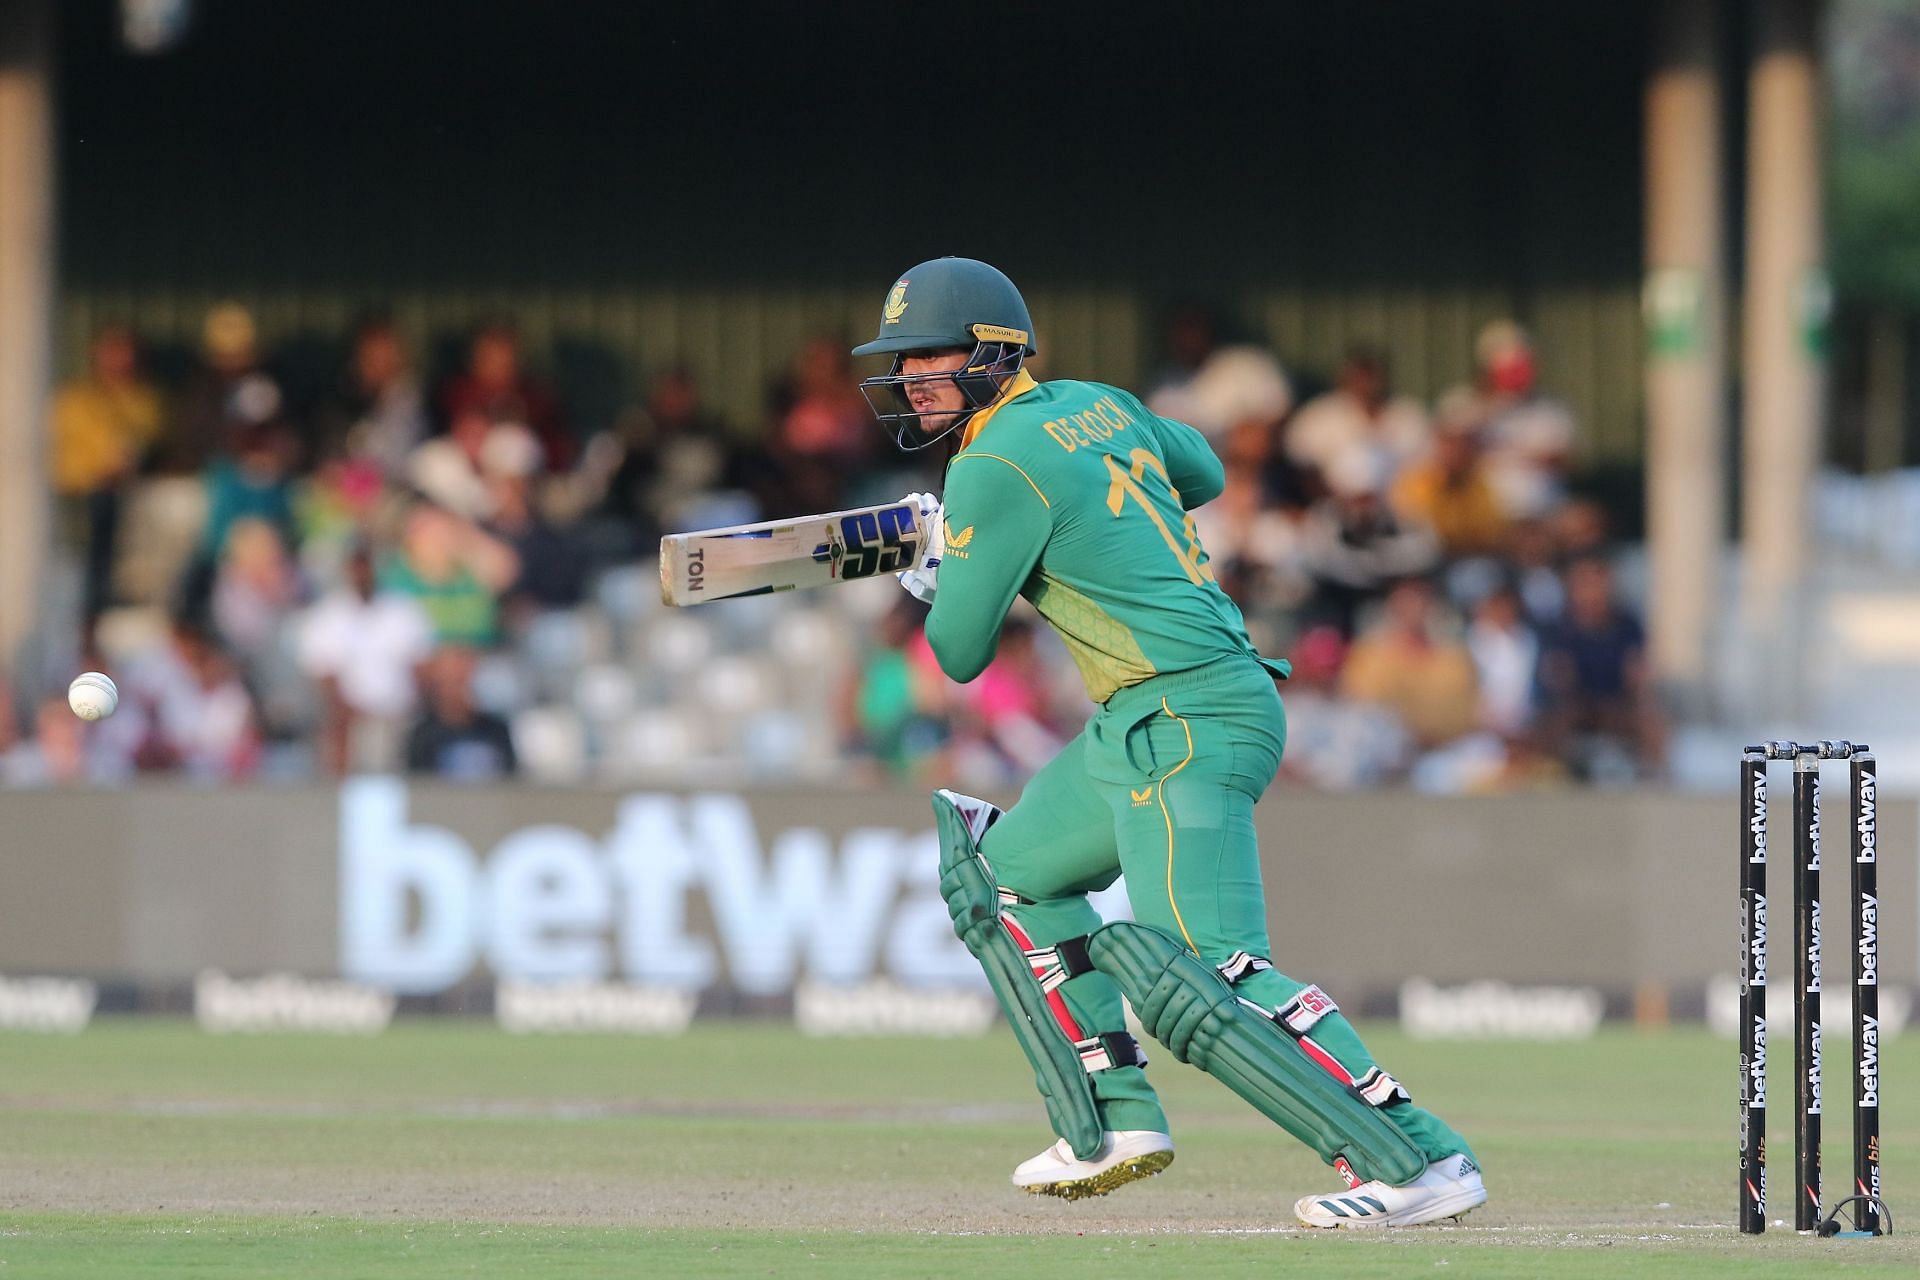 South Africa v West Indies - 2nd One Day International